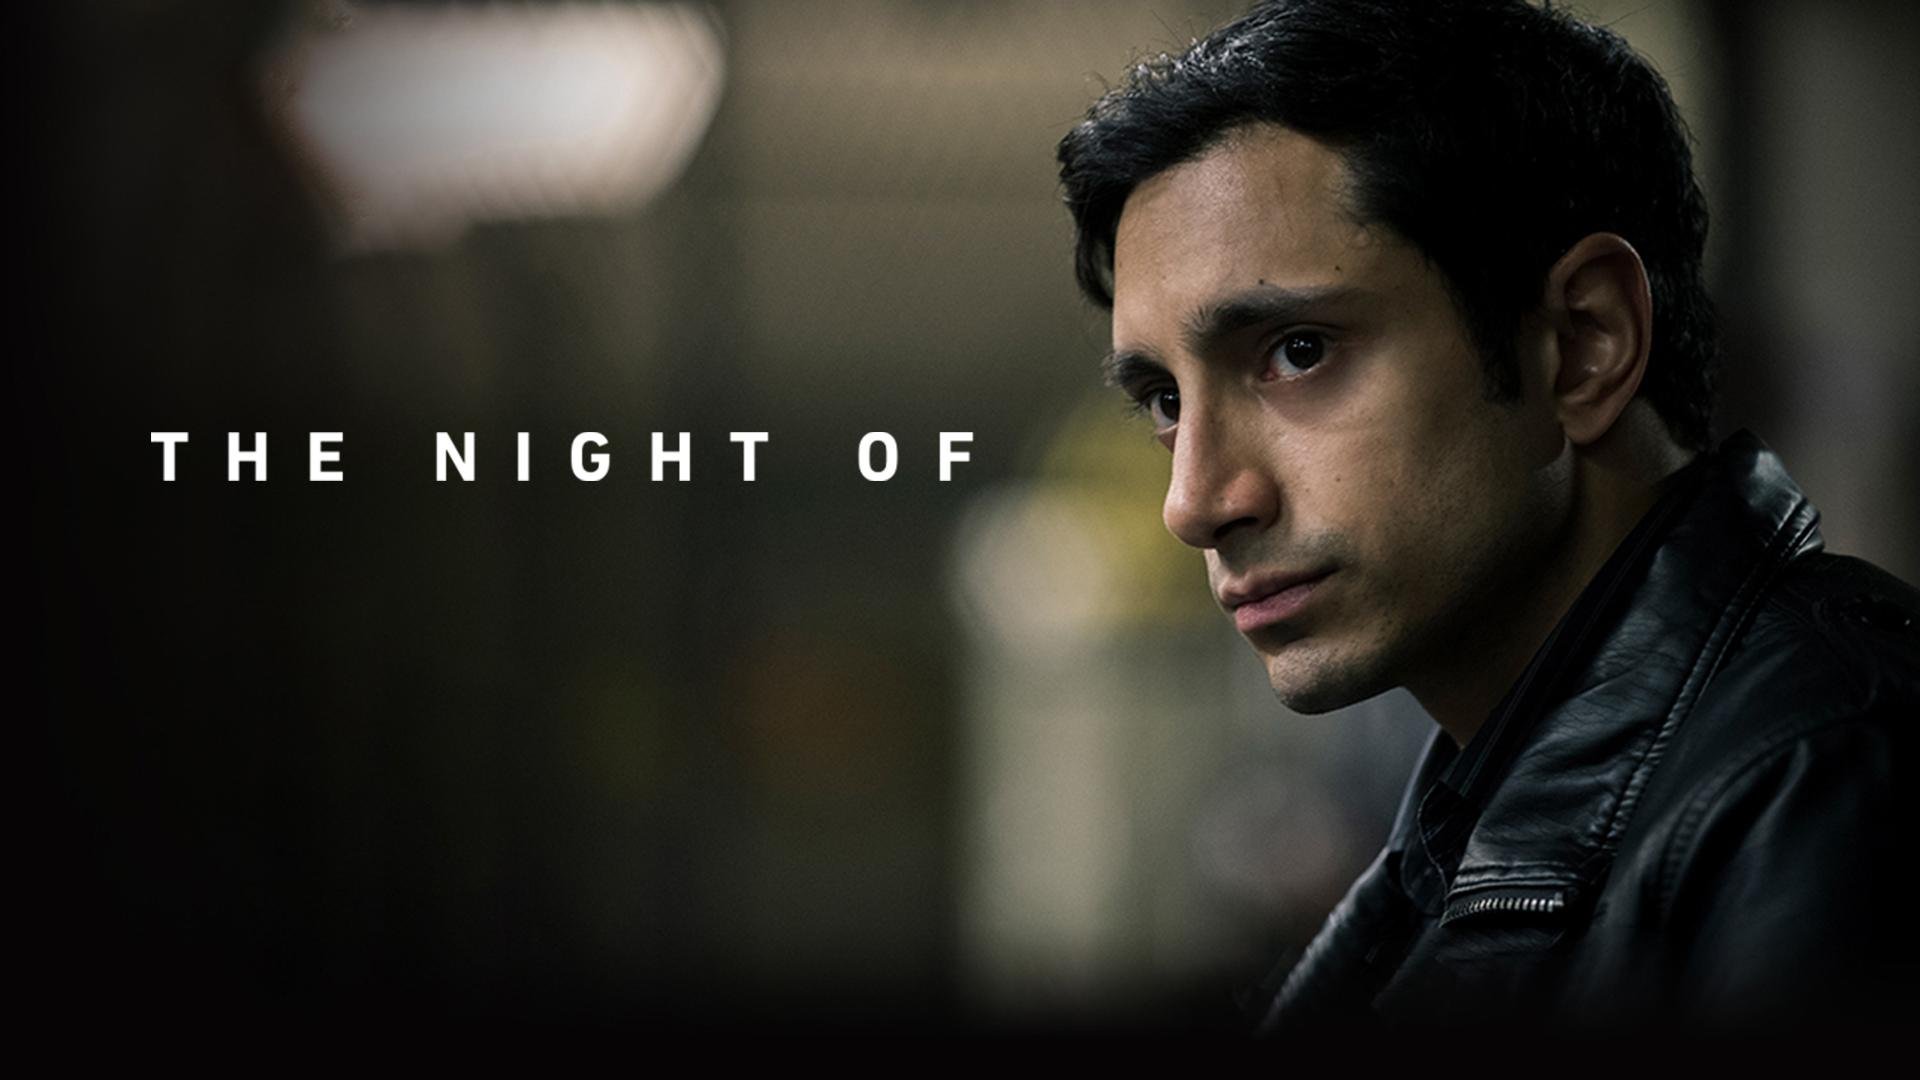 Watch The Night Of Online - Stream Full Episodes